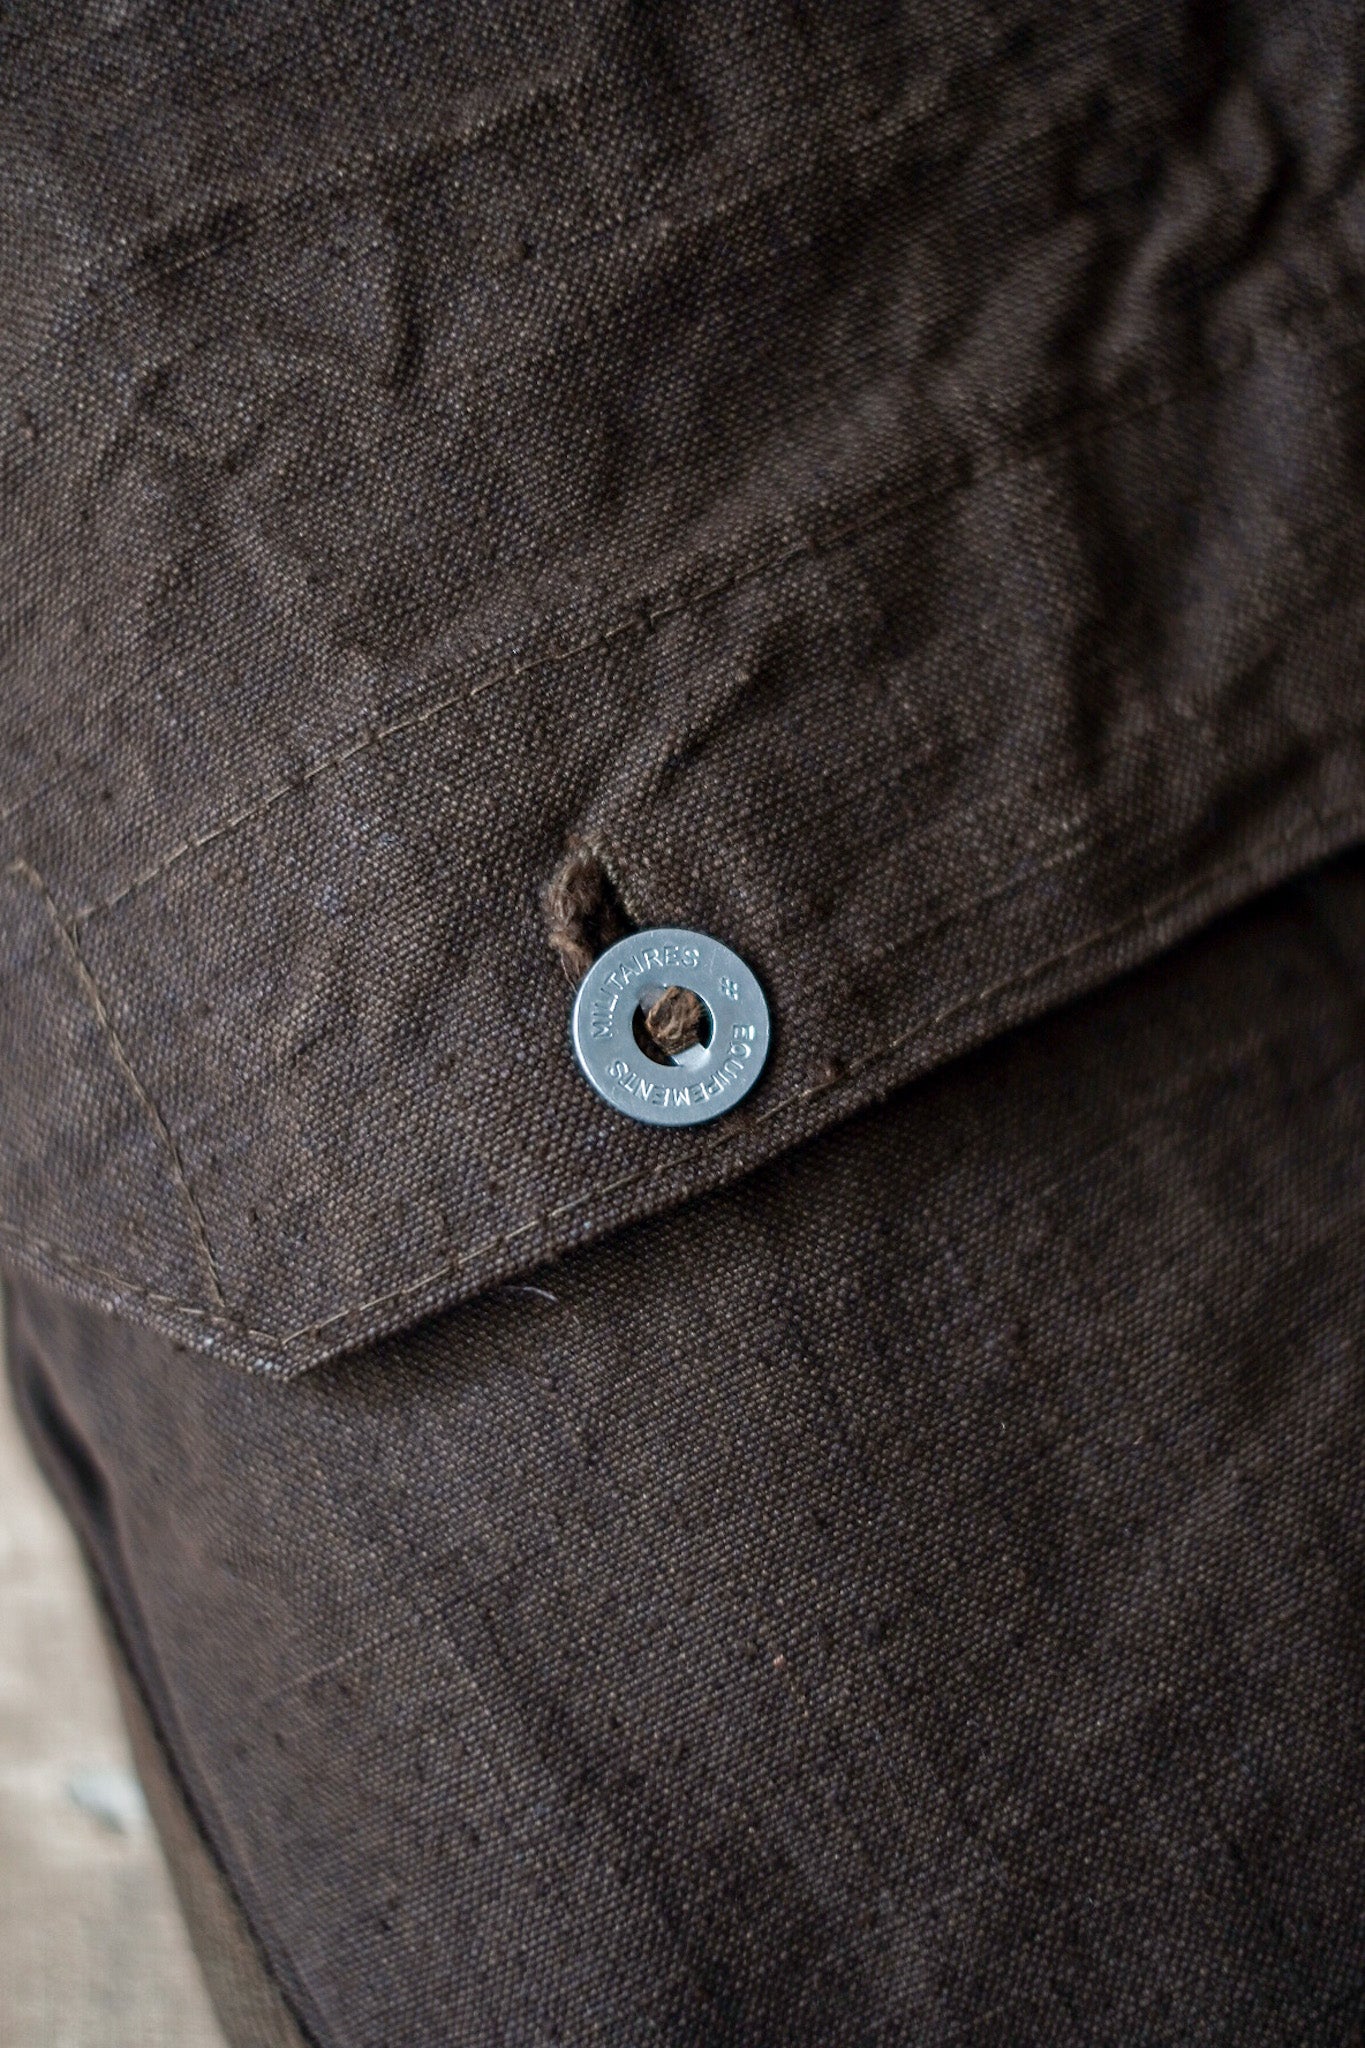 [~ 40's] French Army Brown Linen Musette Bag "Dead Stock"